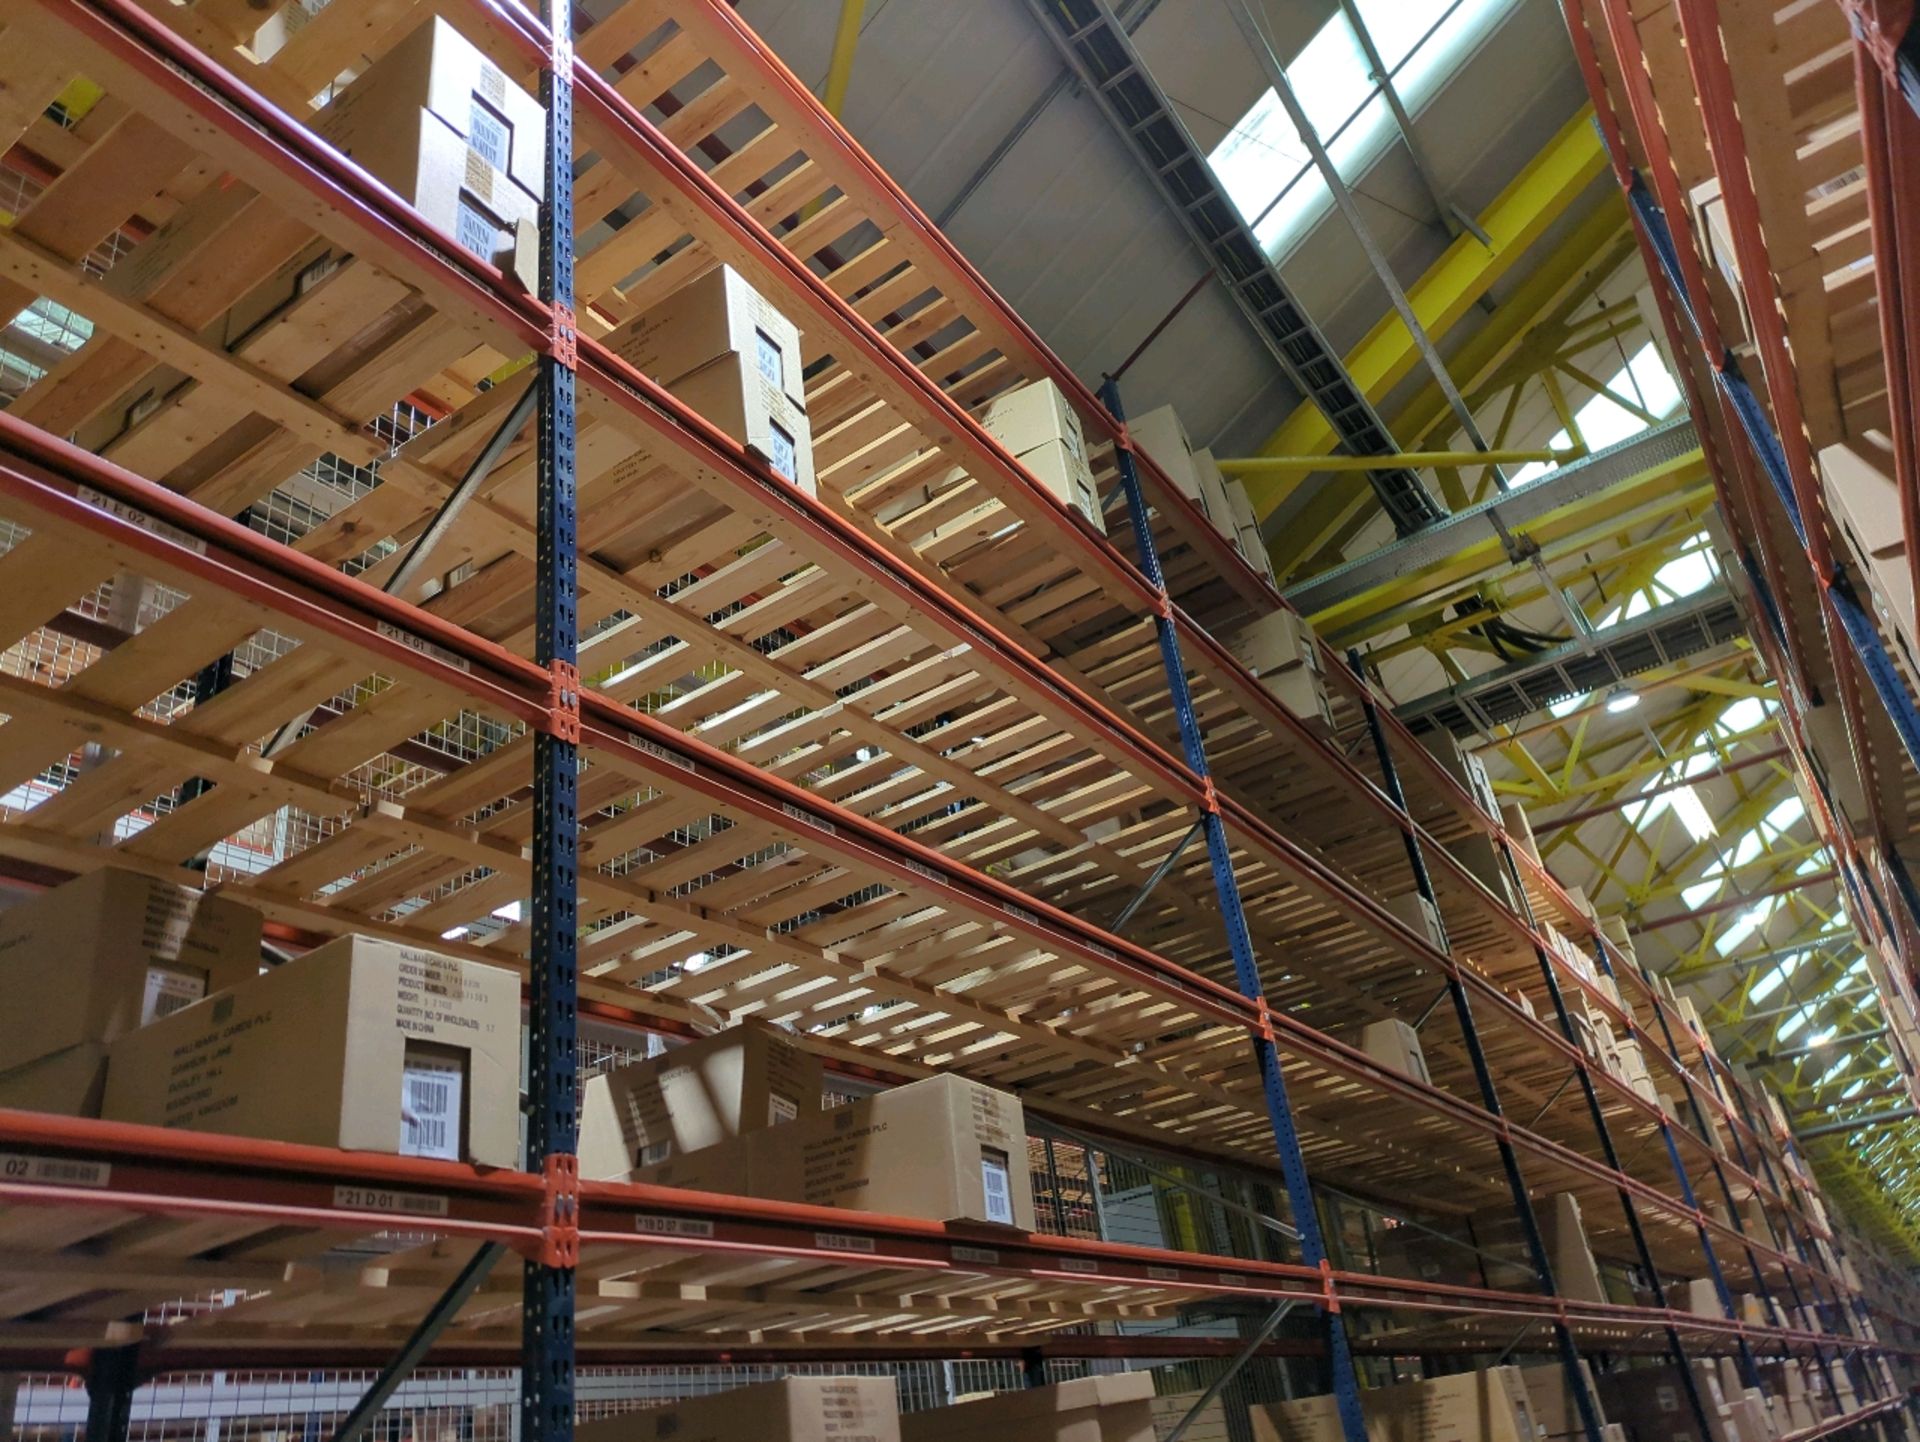 Run Of 12 Bays Of Boltless Industrial Pallet Racking - Image 8 of 9